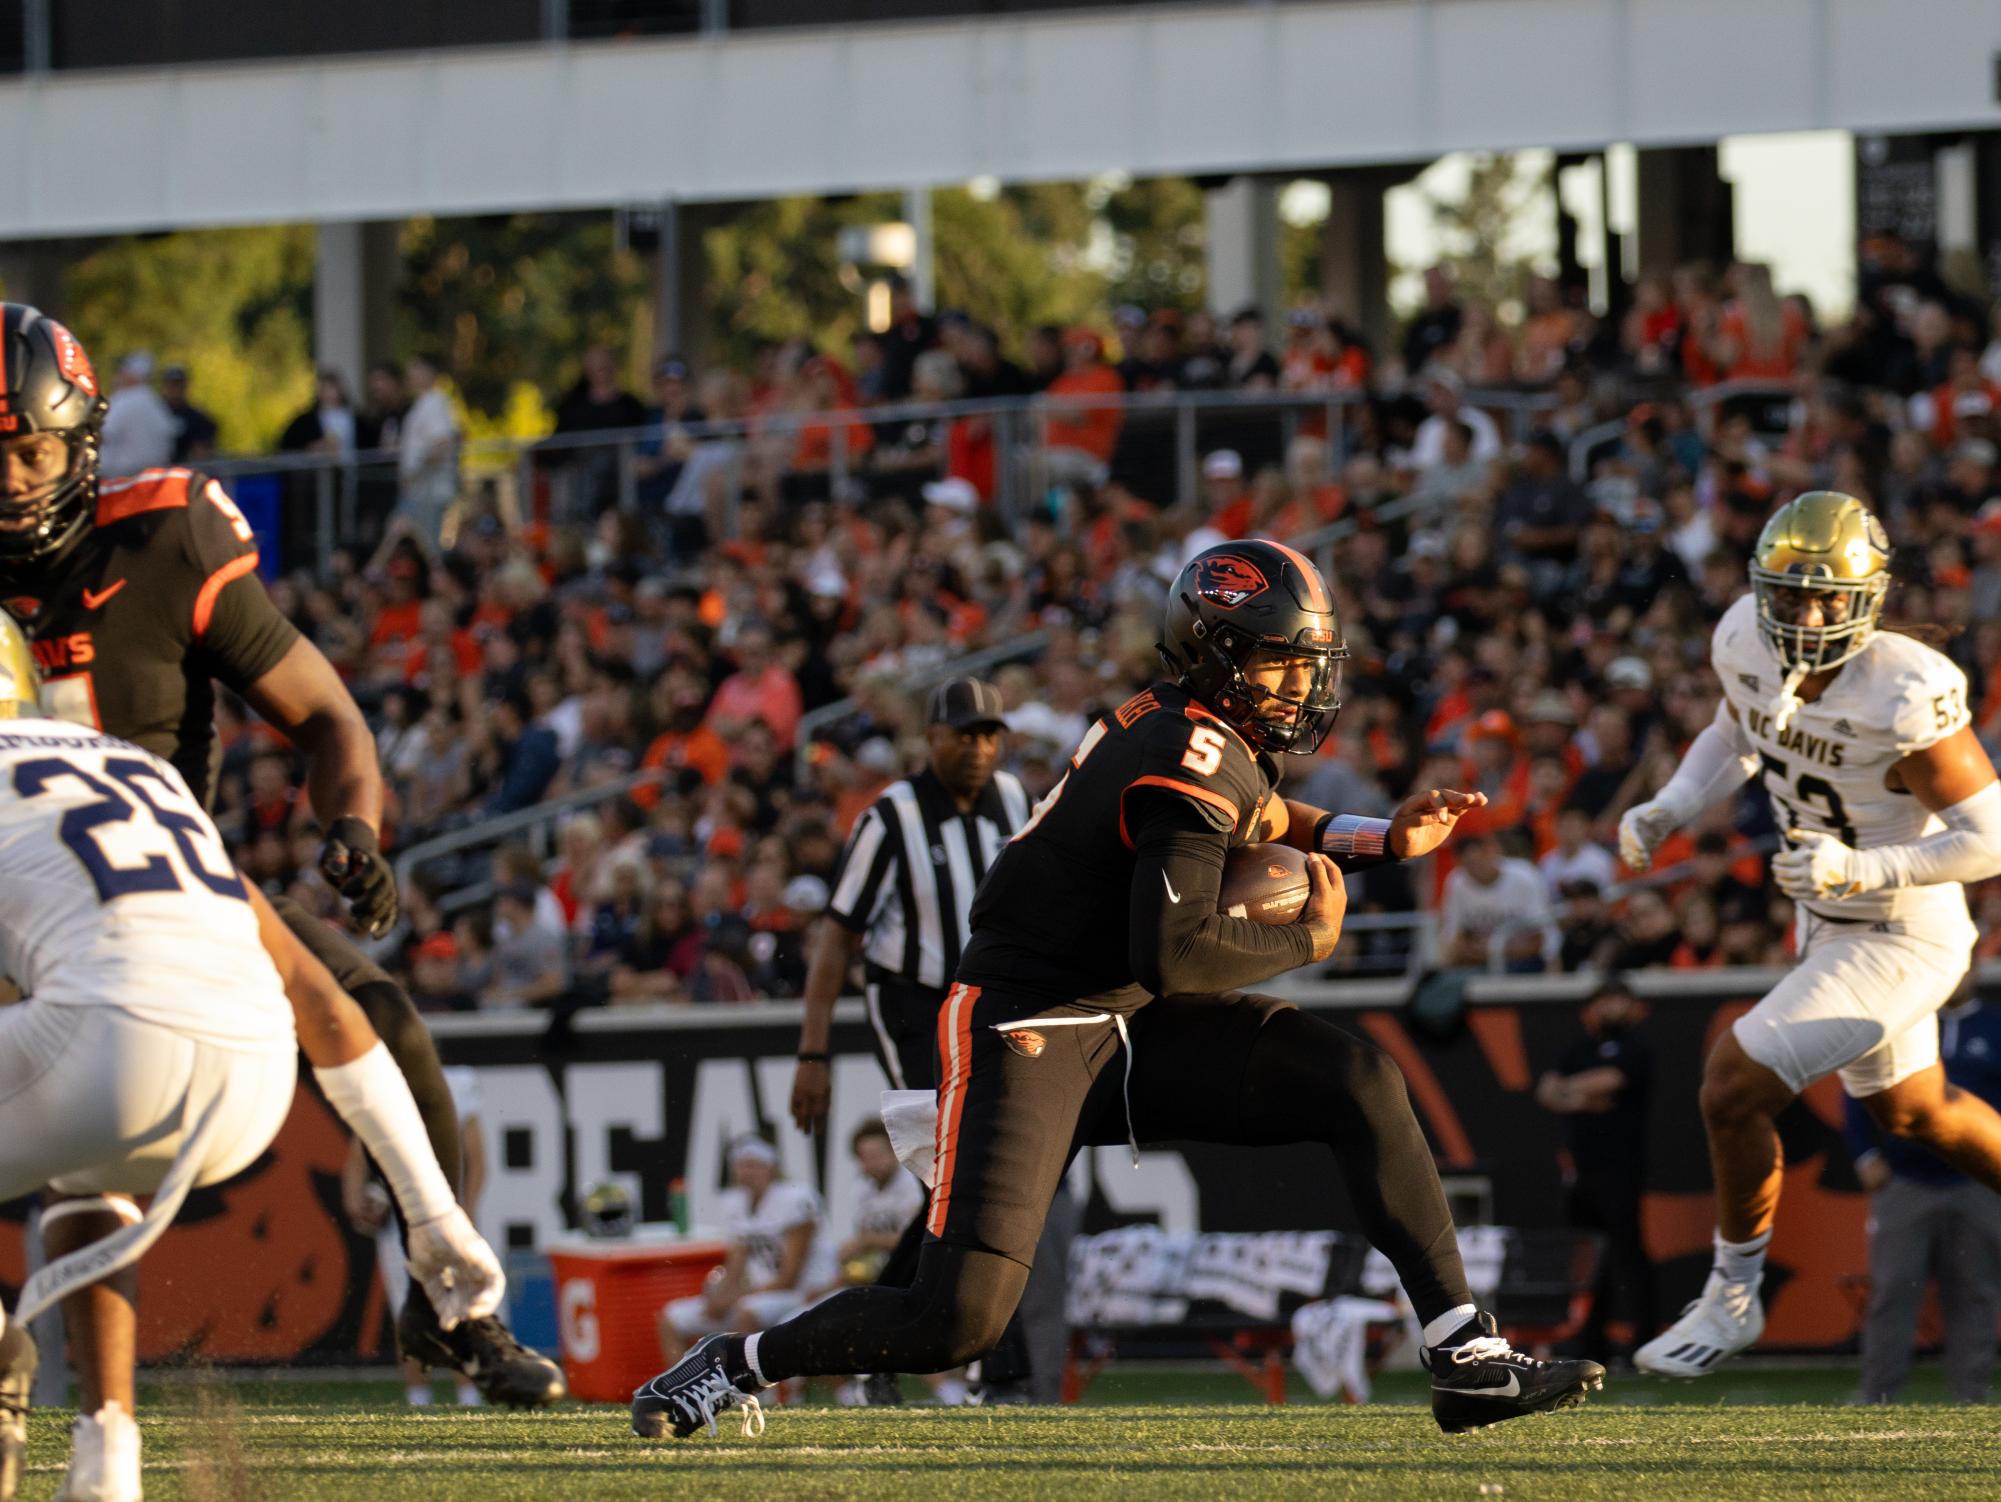 Oregon State quarterback DJ Uiagalelei jukes out a defender on his way to a touchdown in the first quarter of the game against UC Davis in Reser Stadium on August 9 2023. Uiagalelei played only the first half, completing 8 of 13 passes for 107 yards and two touchdowns while adding another on the ground in a 55-7 Beavers win.